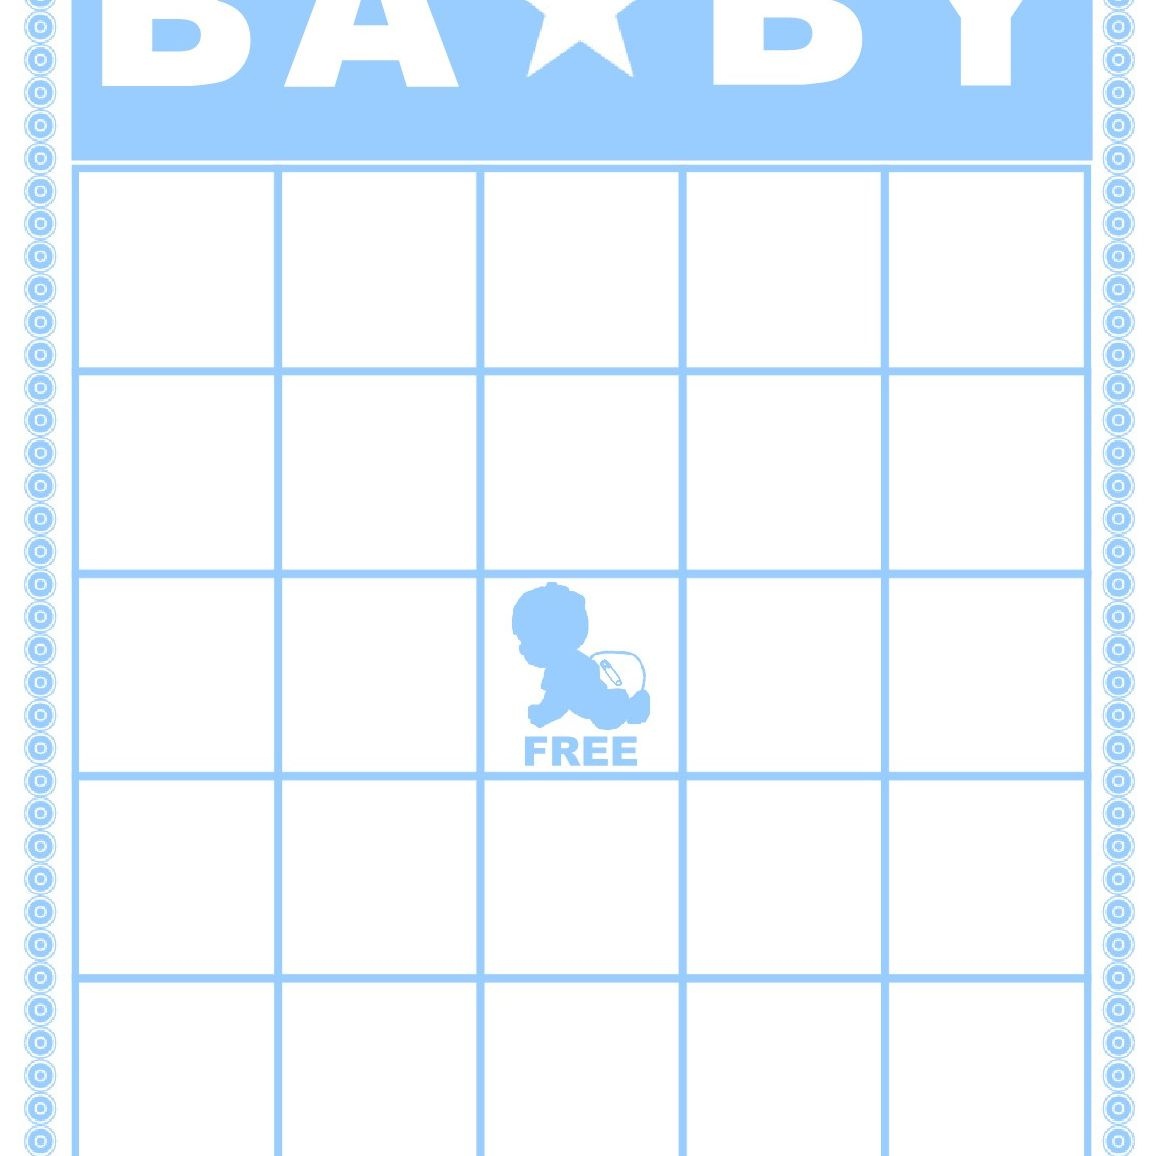 Free Baby Shower Bingo Cards Your Guests Will Love - Printable Baby Shower Bingo Games Free